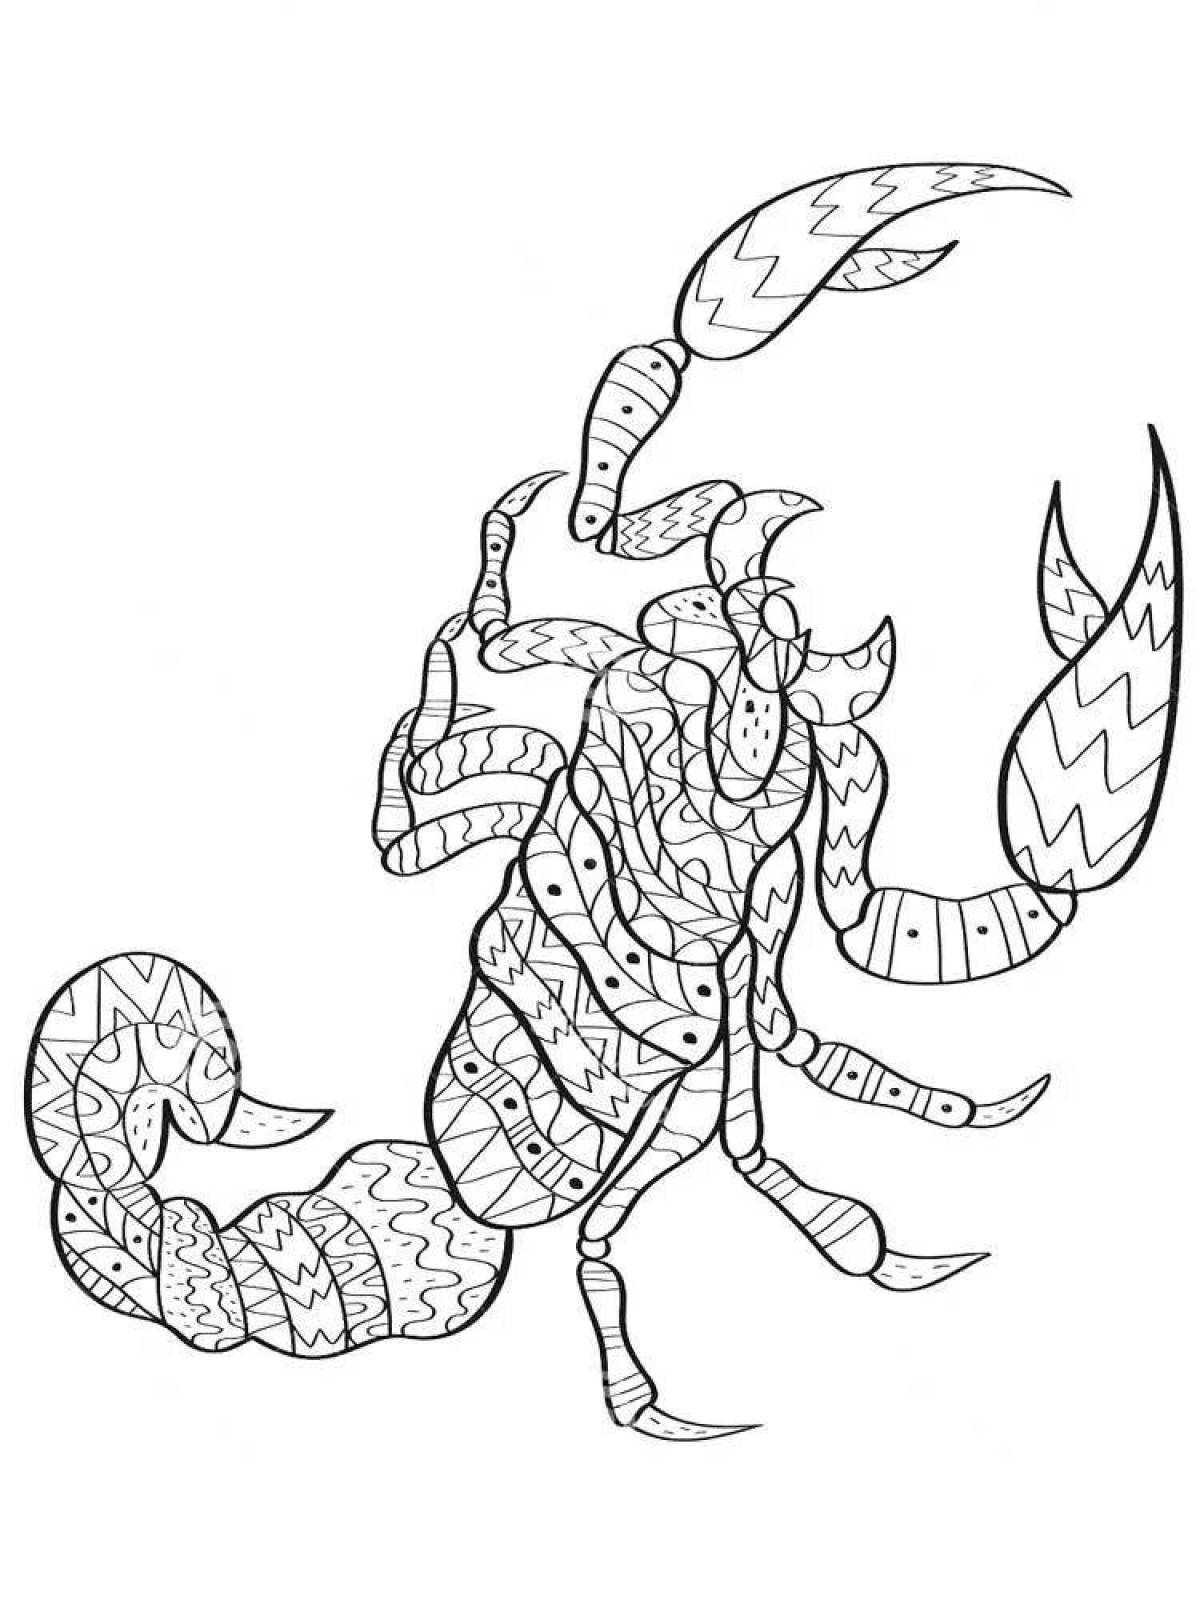 Coloring page brave scorpion